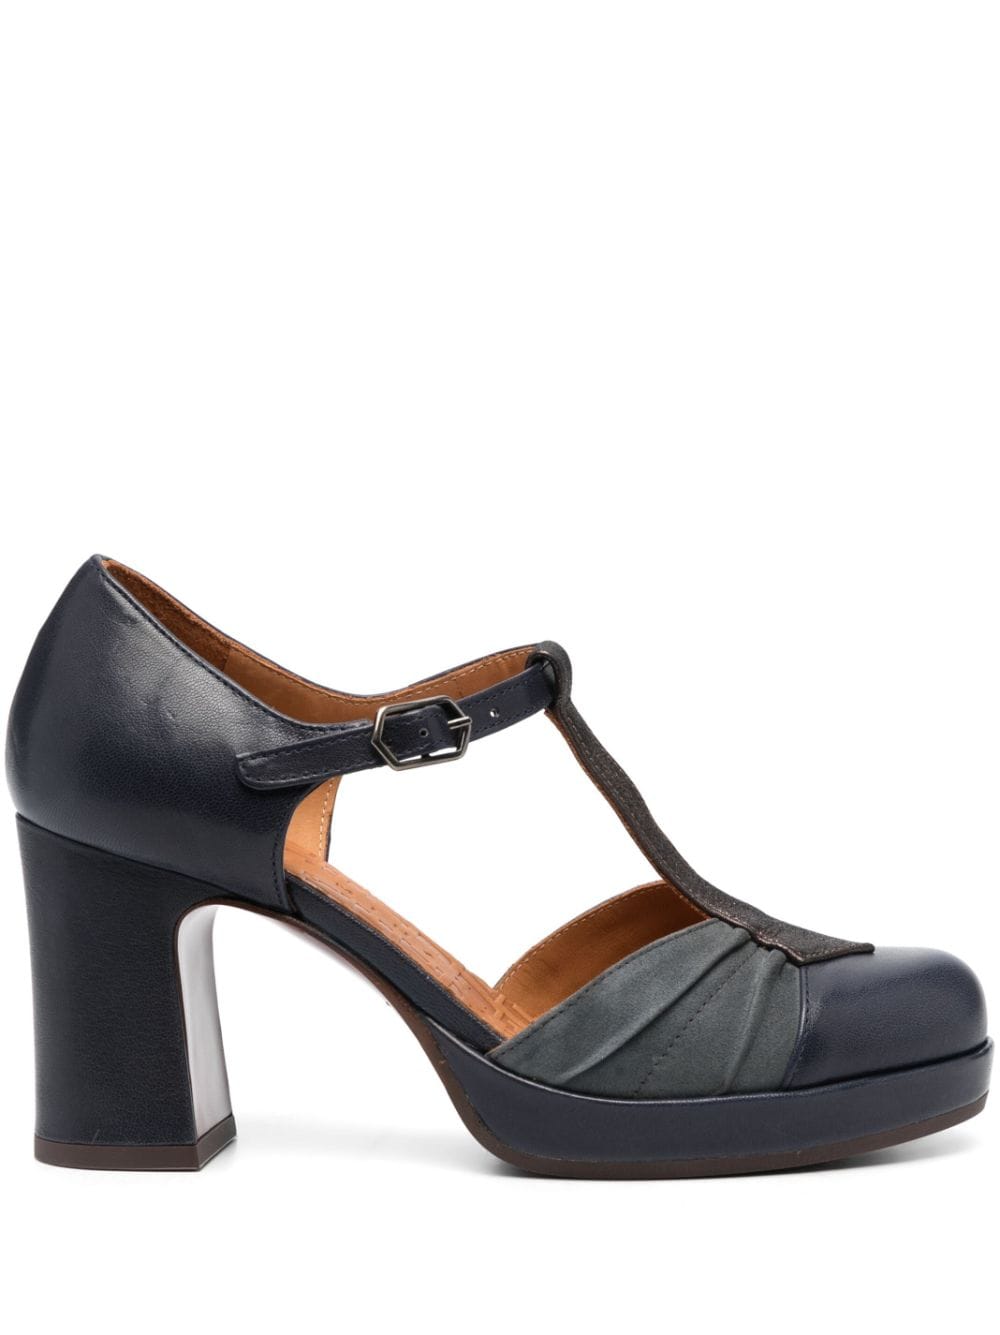 CHIE MIHARA 80MM T-BAR LEATHER PUMPS